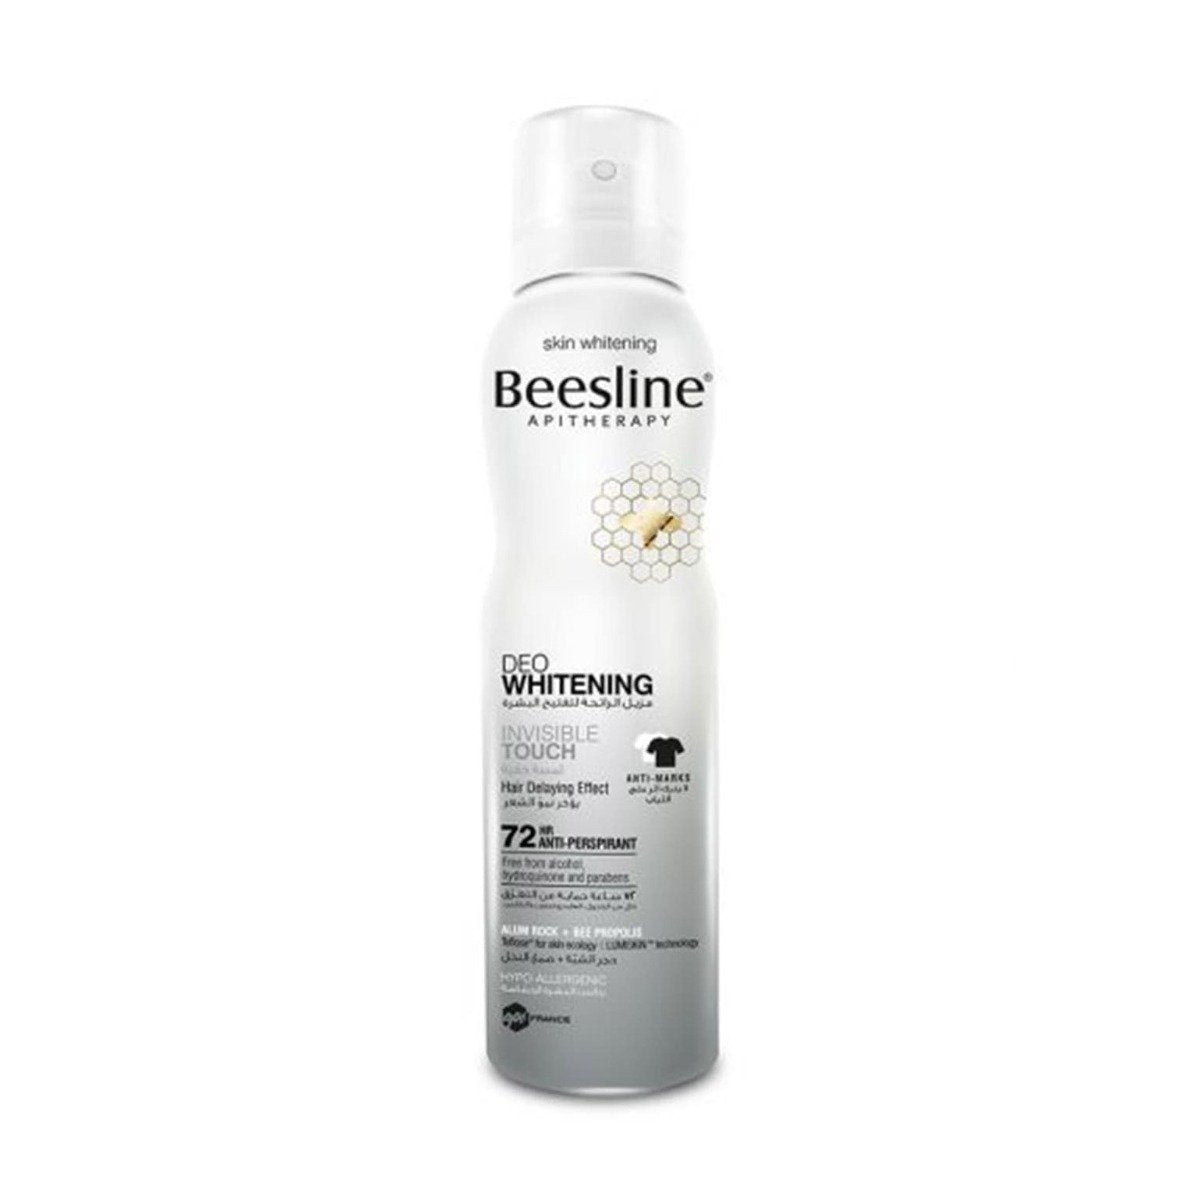 Beesline Deo Whitening Spray Invisible Touch - 150ml - Bloom Pharmacy